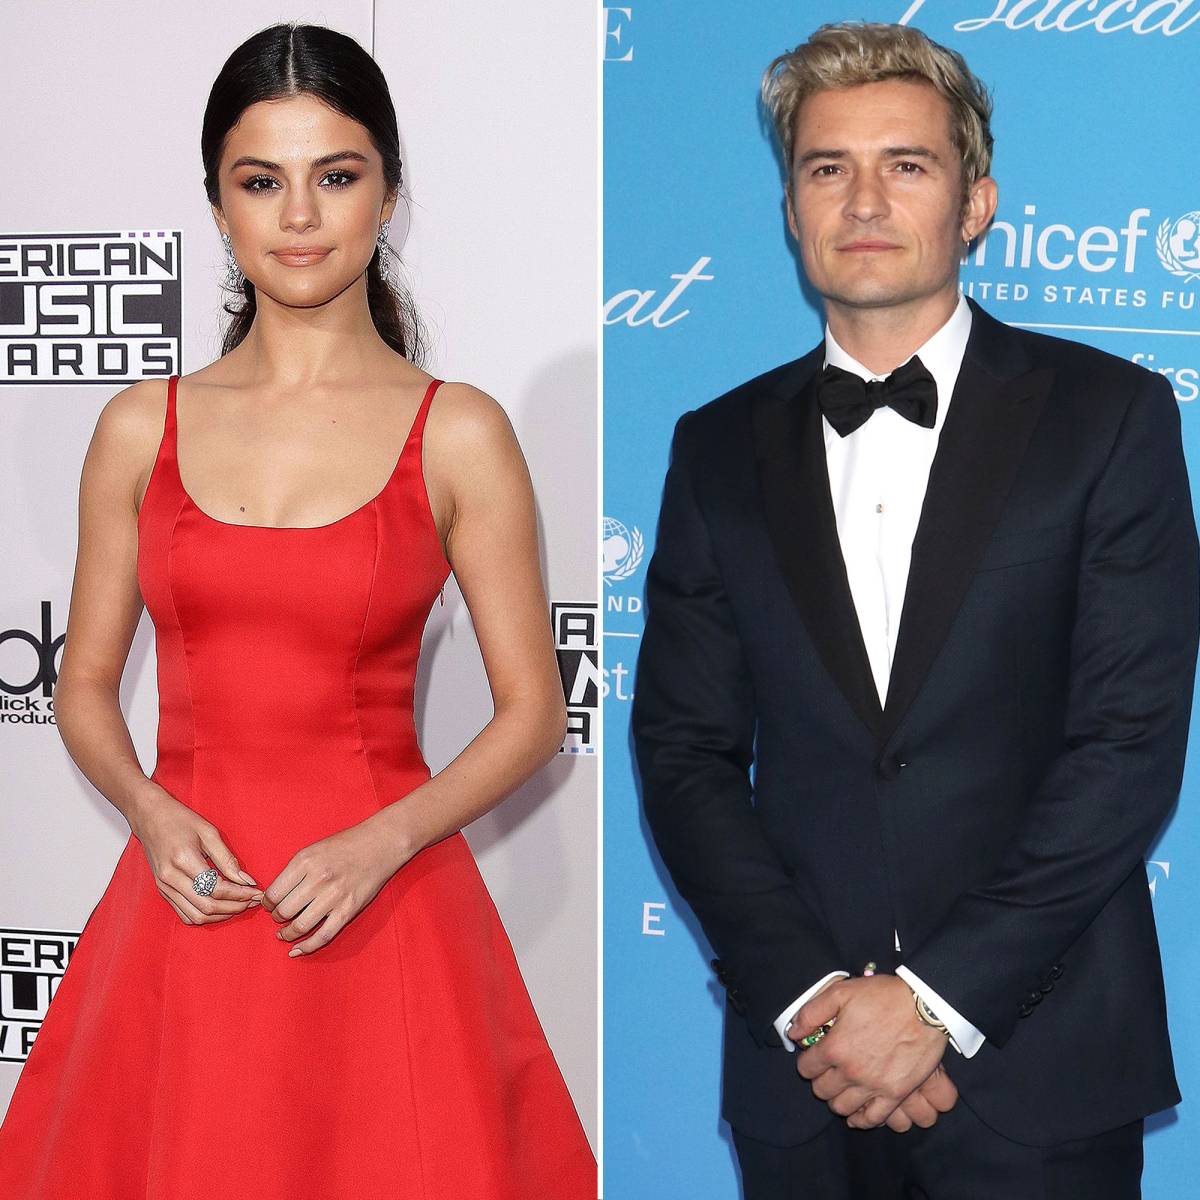 Dating and selena gomez orlando bloom Who Is